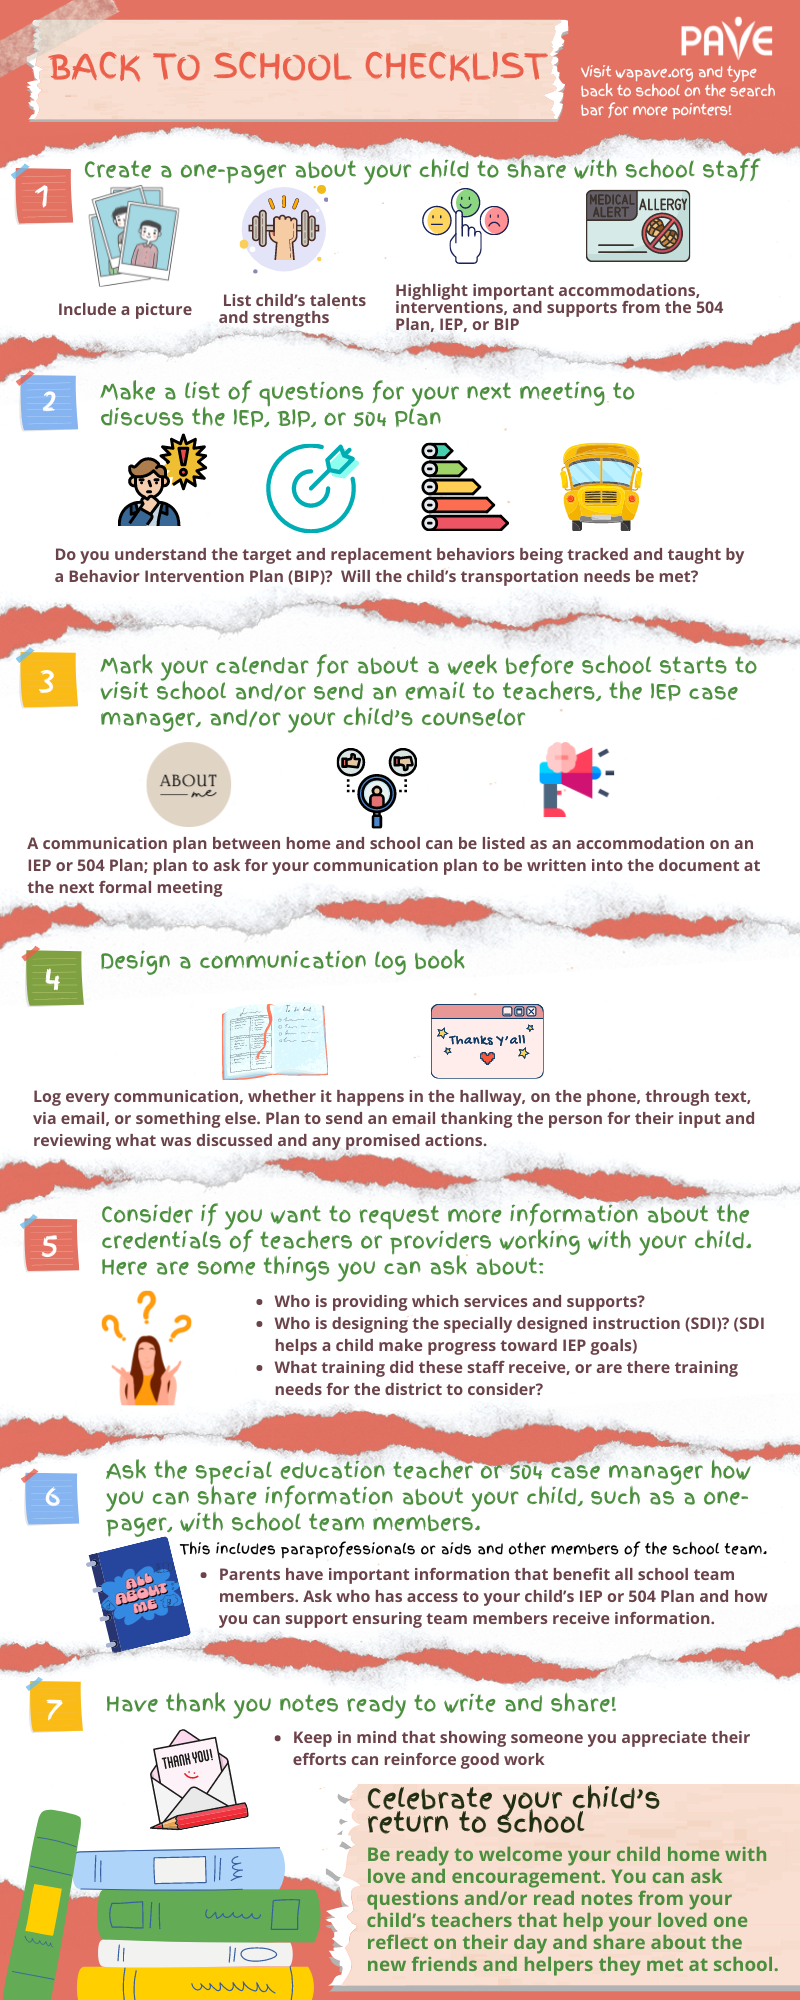 Back to School Checklist click to find the accessible PDF